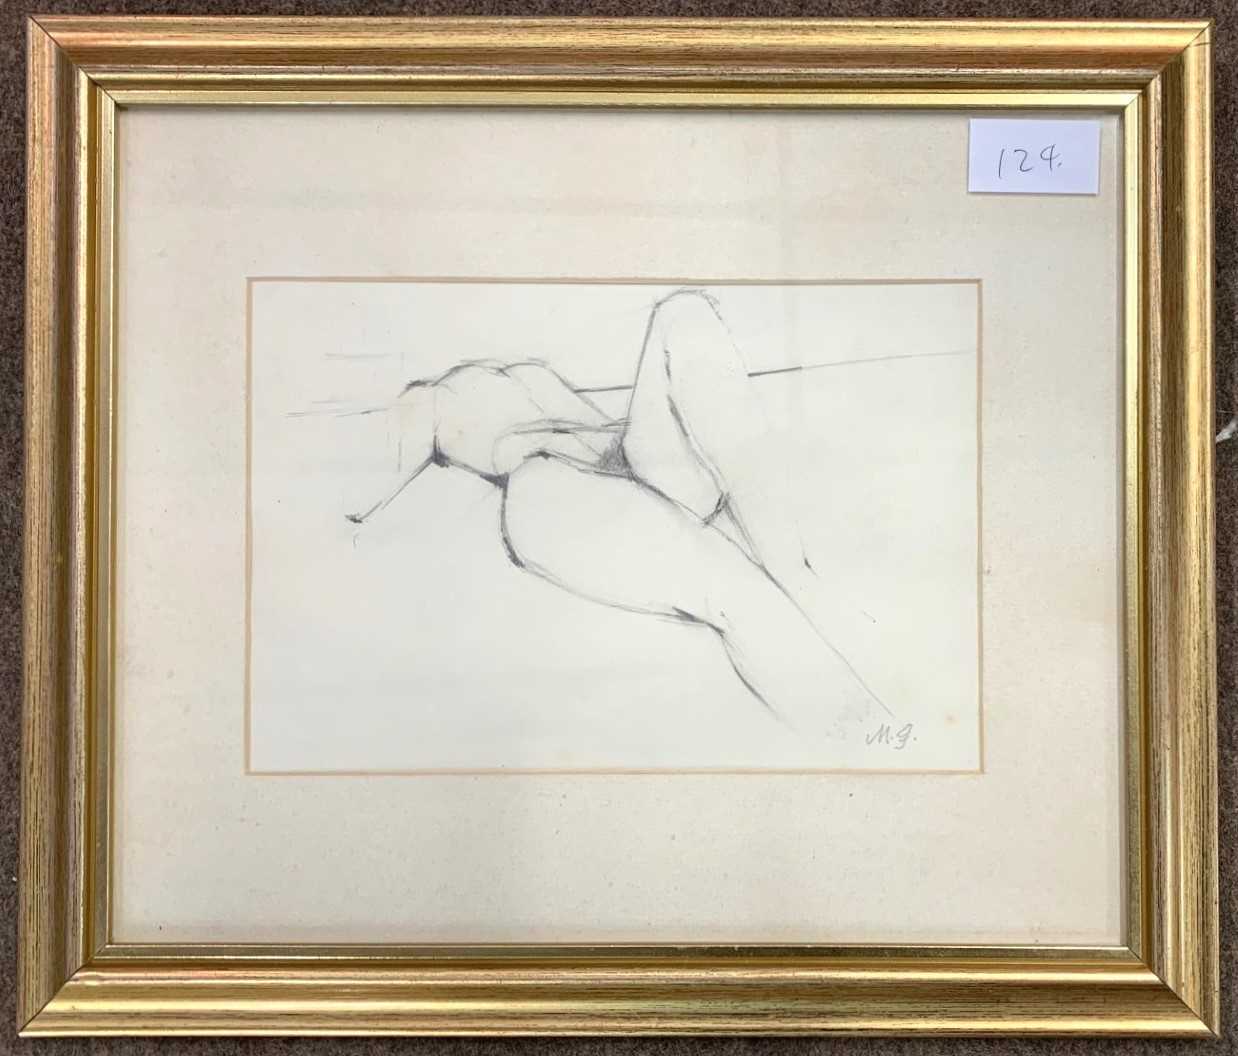 Maurice Feild (British,1905-1988), Female nude study, pencil on paper, initialed,14.5x21.5cm, framed